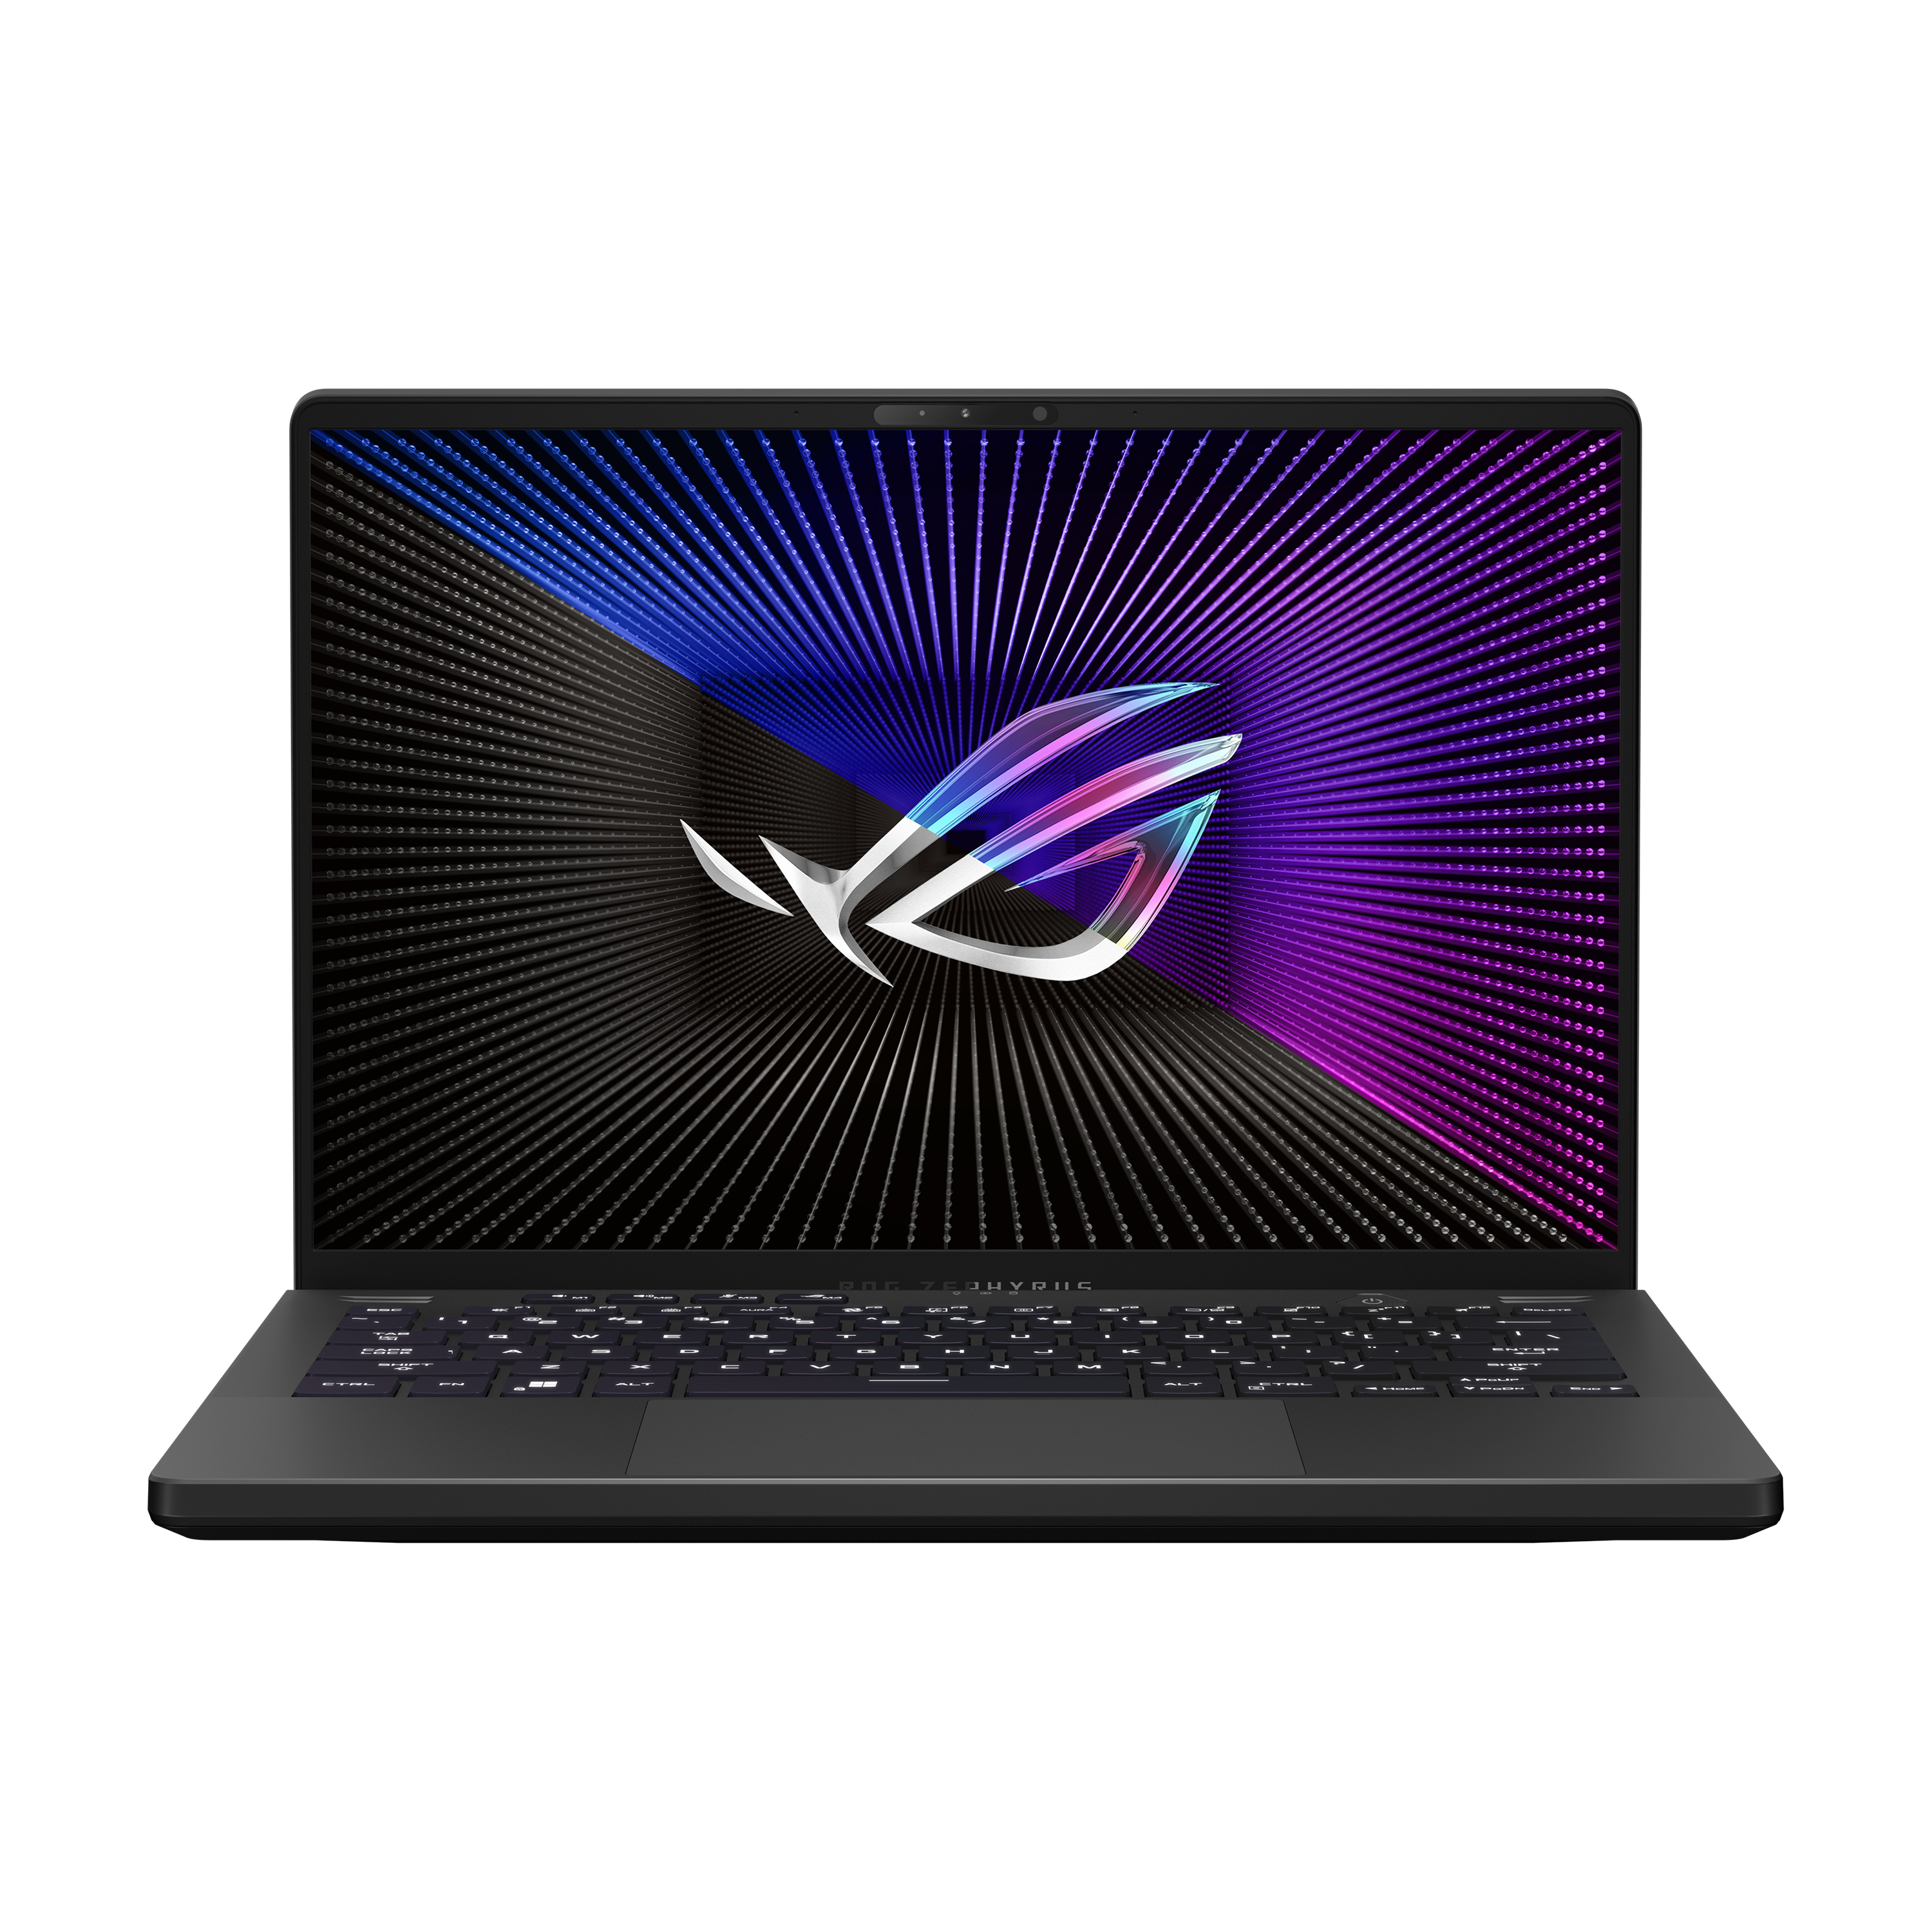 Rent Asus VivoBook 17 S712E Laptop - Intel® Core™ i3-1115G4 - 12GB - 512GB  SSD from €39.90 per month